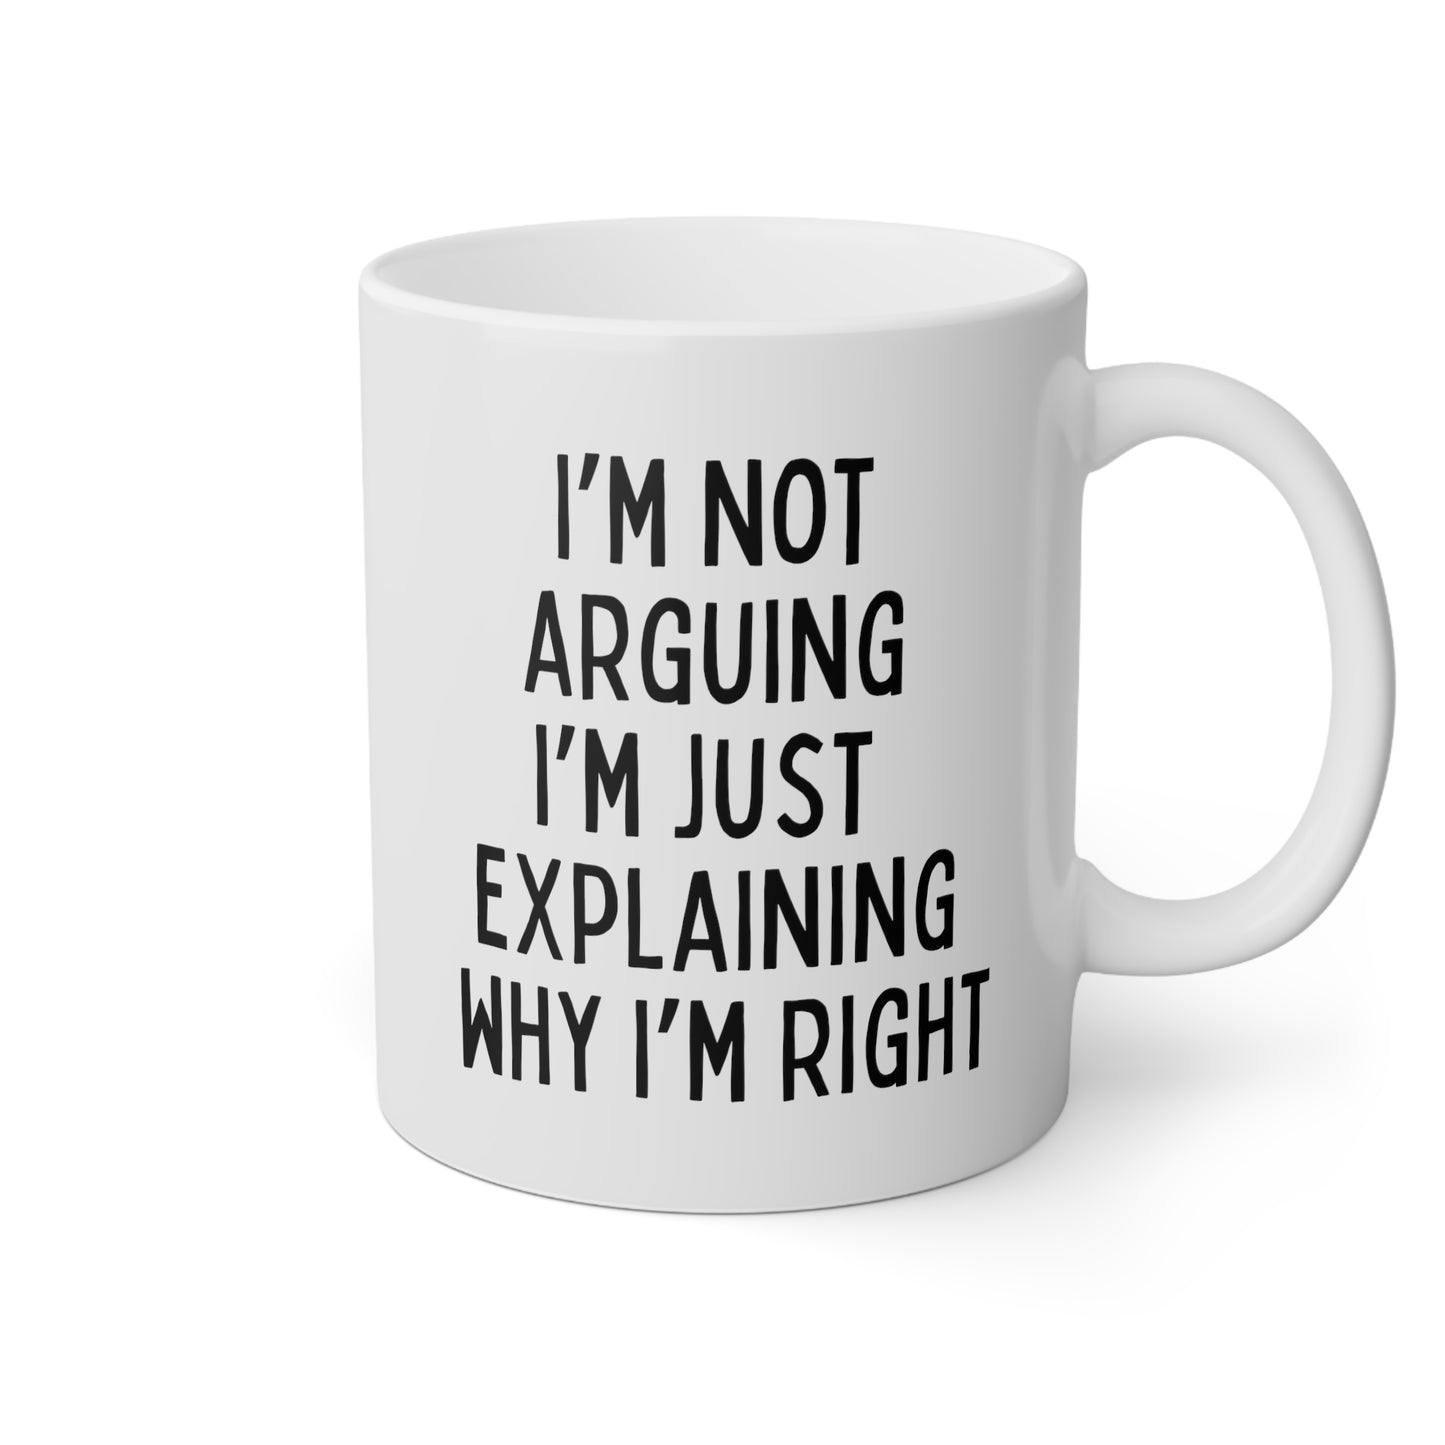 I'm Not Arguing I'm Just Explaining Why I'm Right 11oz white funny large coffee mug gift for birthday christmas sarcastic sassy snarky tea cup waveywares wavey wares wavywares wavy wares